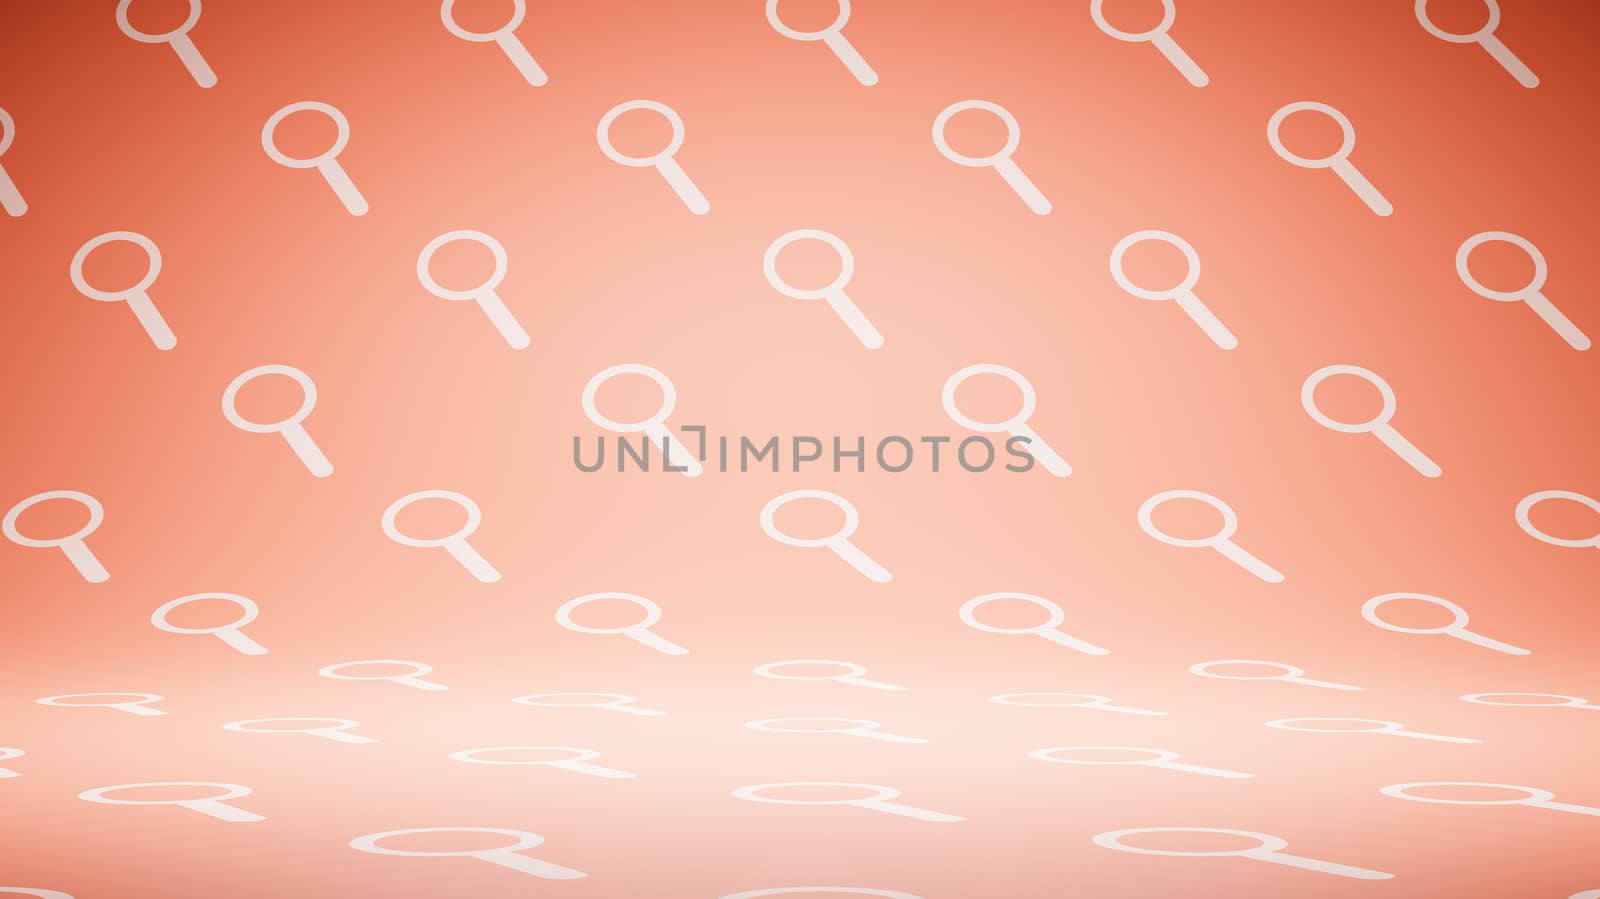 Empty Blank Red and White Magnifier Glass Symbol Pattern Studio Background 3D Render Illustration